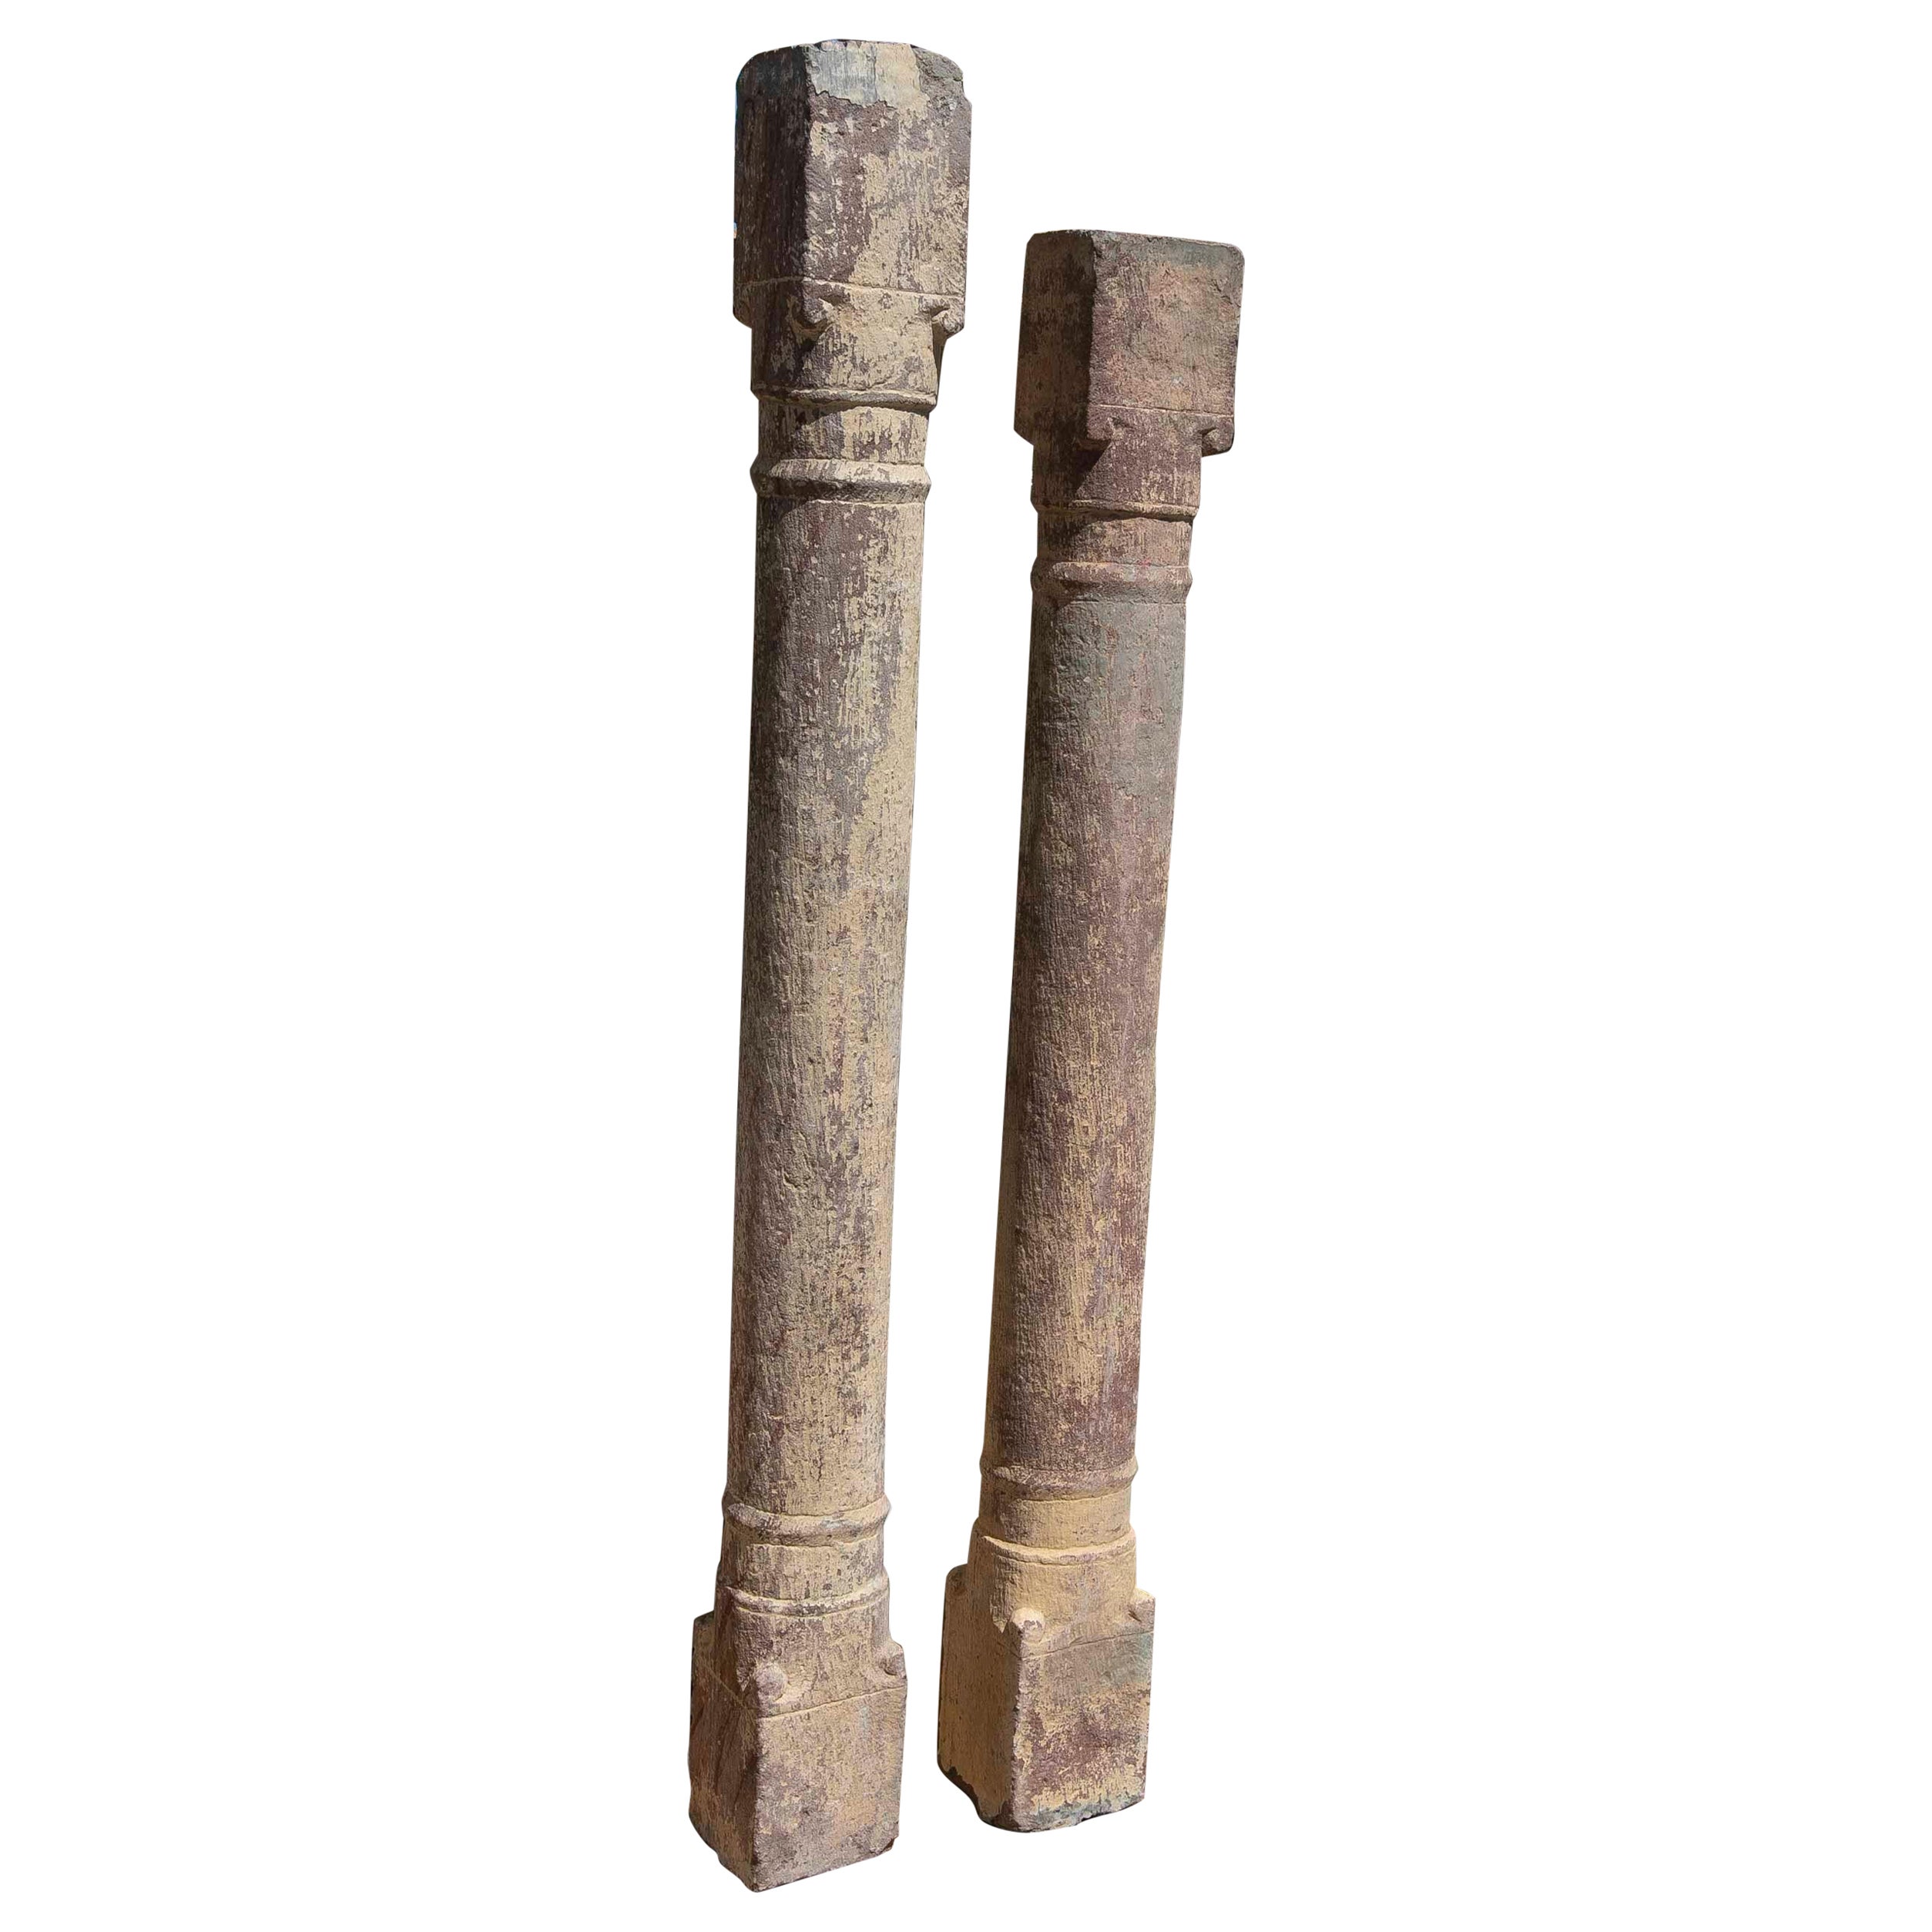 19th Century Pair of Hand-Carved Stone Columns